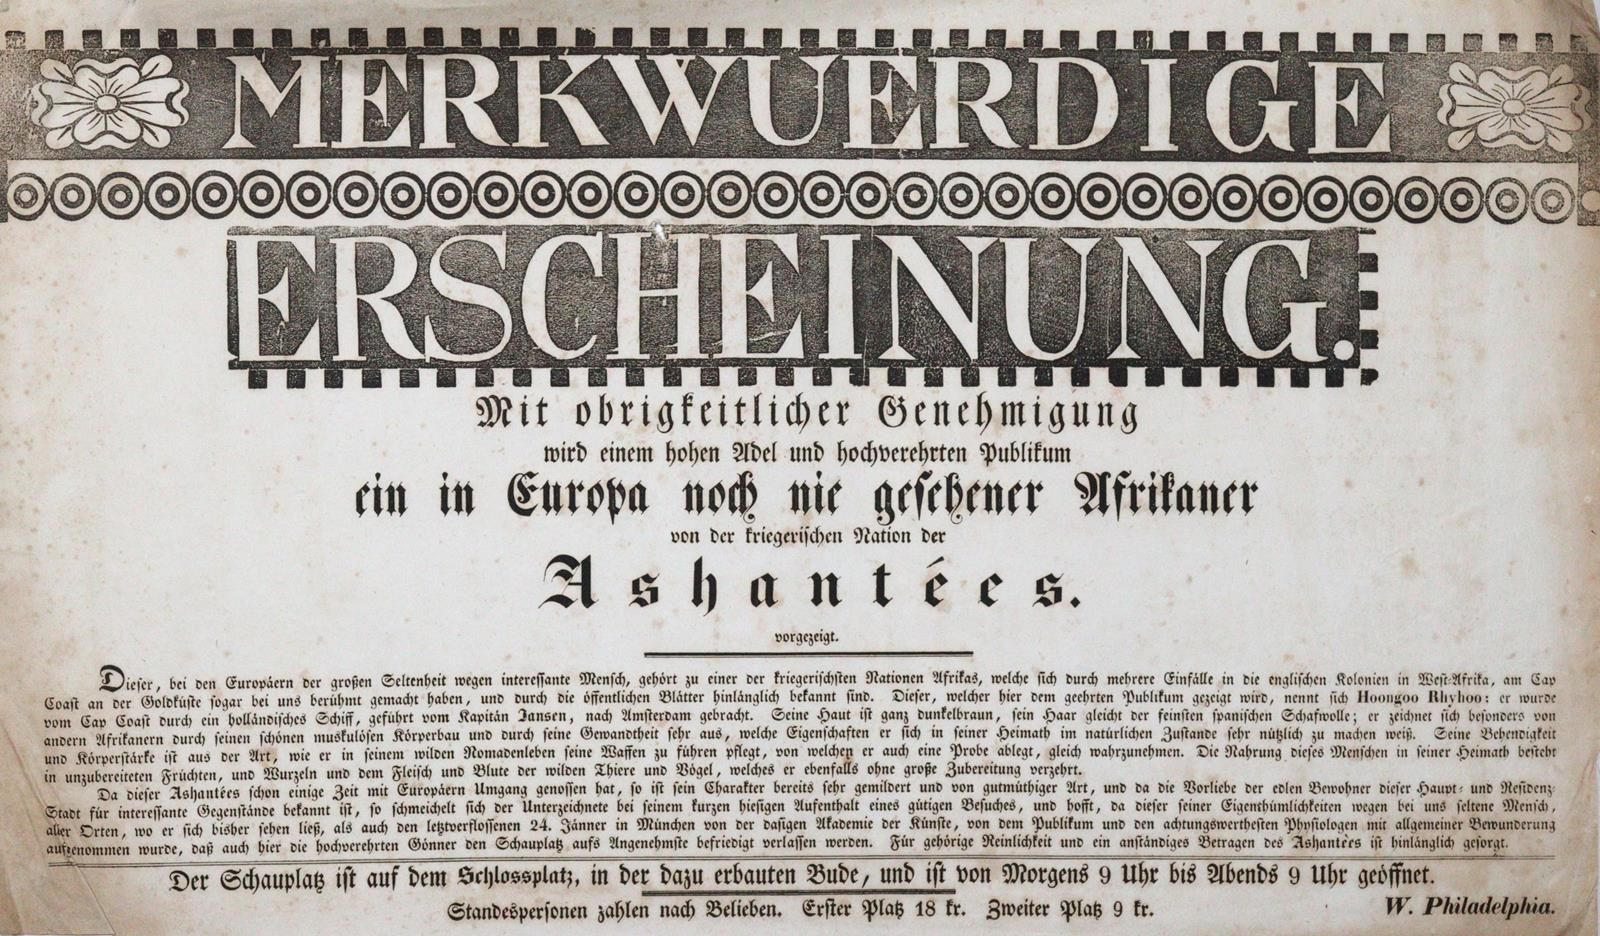 Merkwürdige Erscheinung. With official permission a high nobility and highly est&hellip;